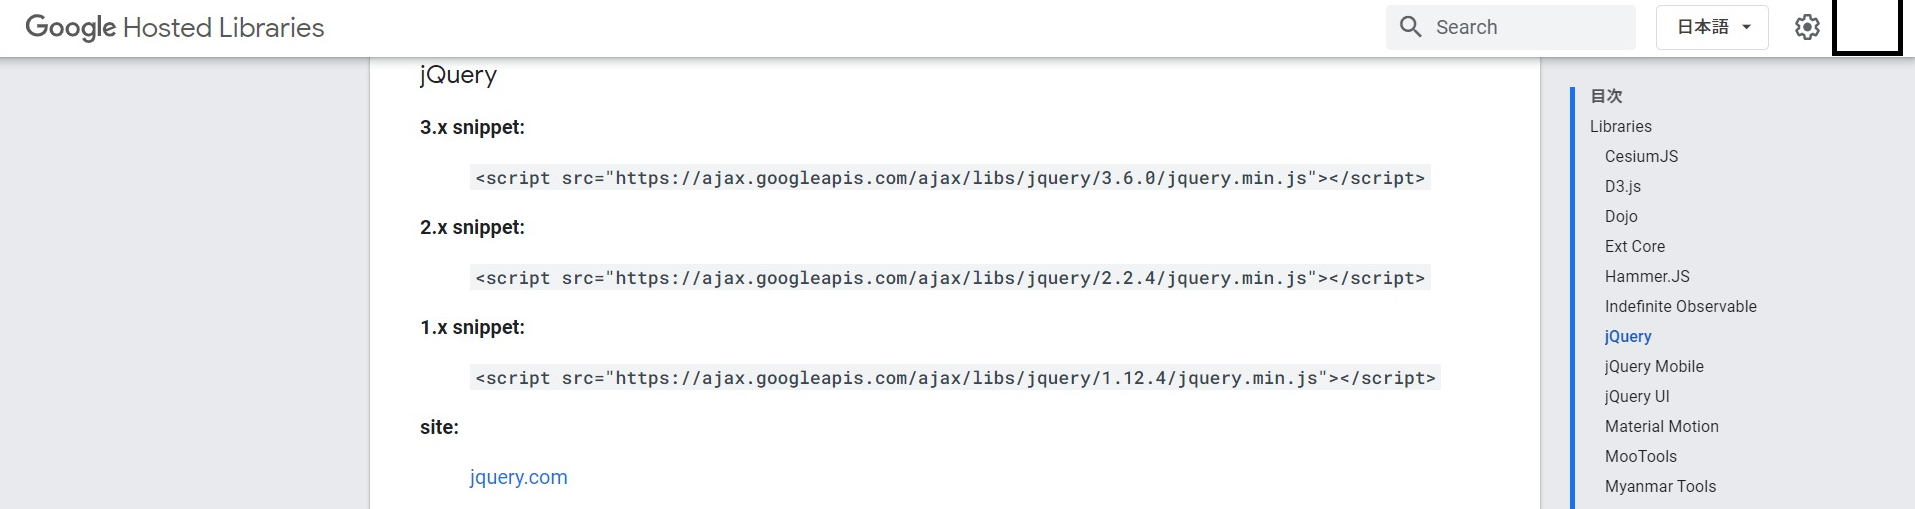 Google Hosted LibrariesのjQuery